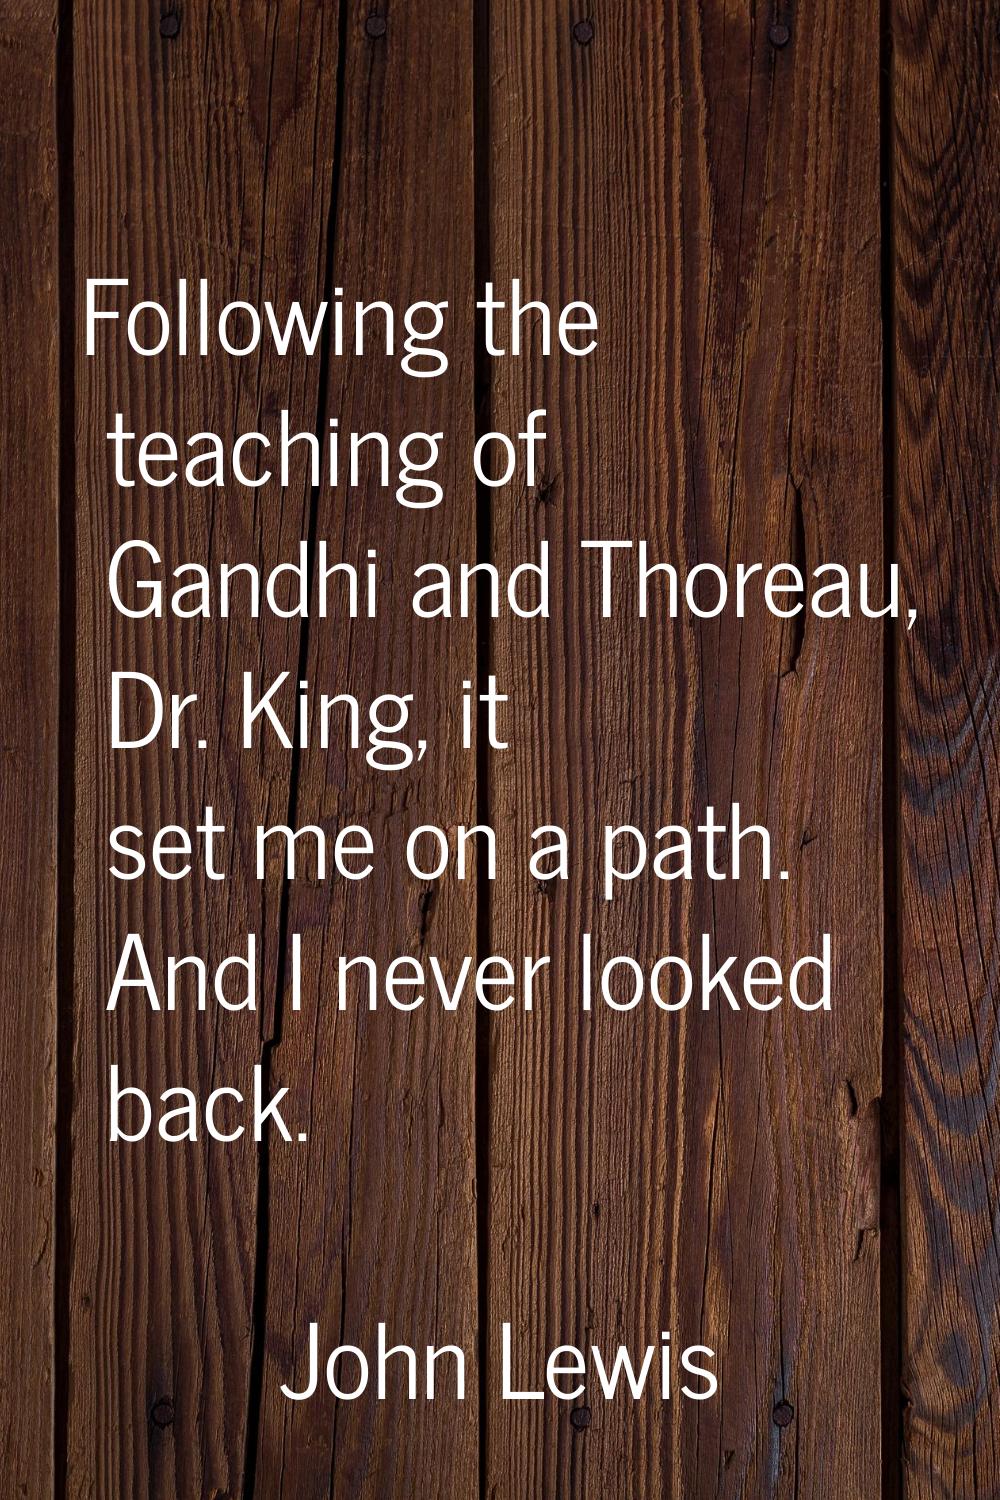 Following the teaching of Gandhi and Thoreau, Dr. King, it set me on a path. And I never looked bac